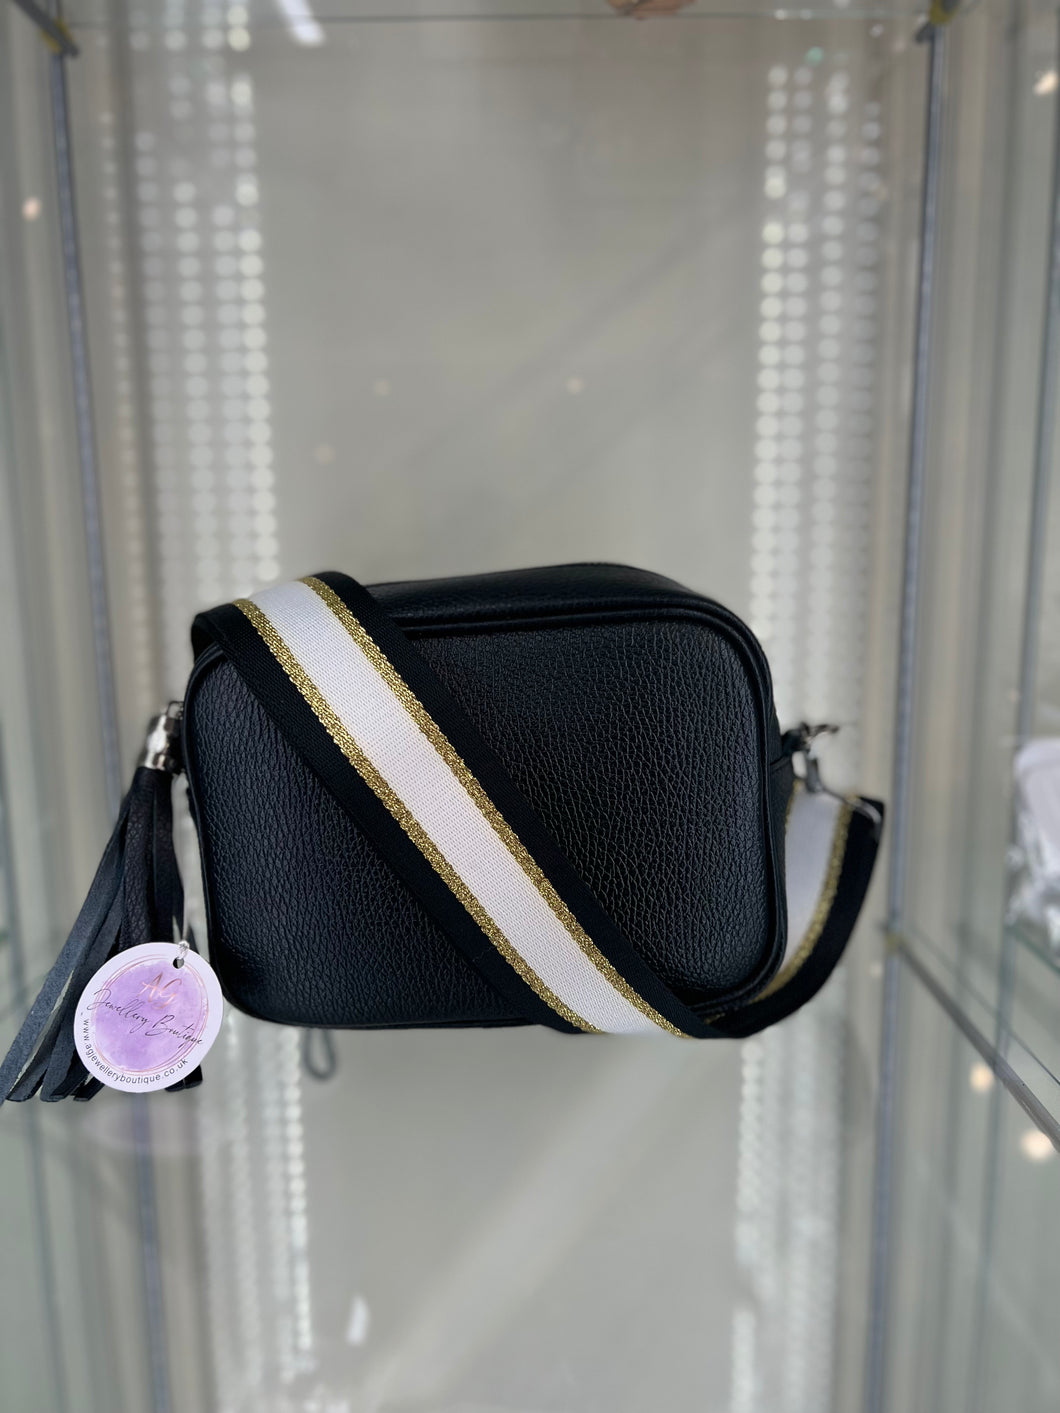 Real leather Black crossbody bag with Black/Gold White strap